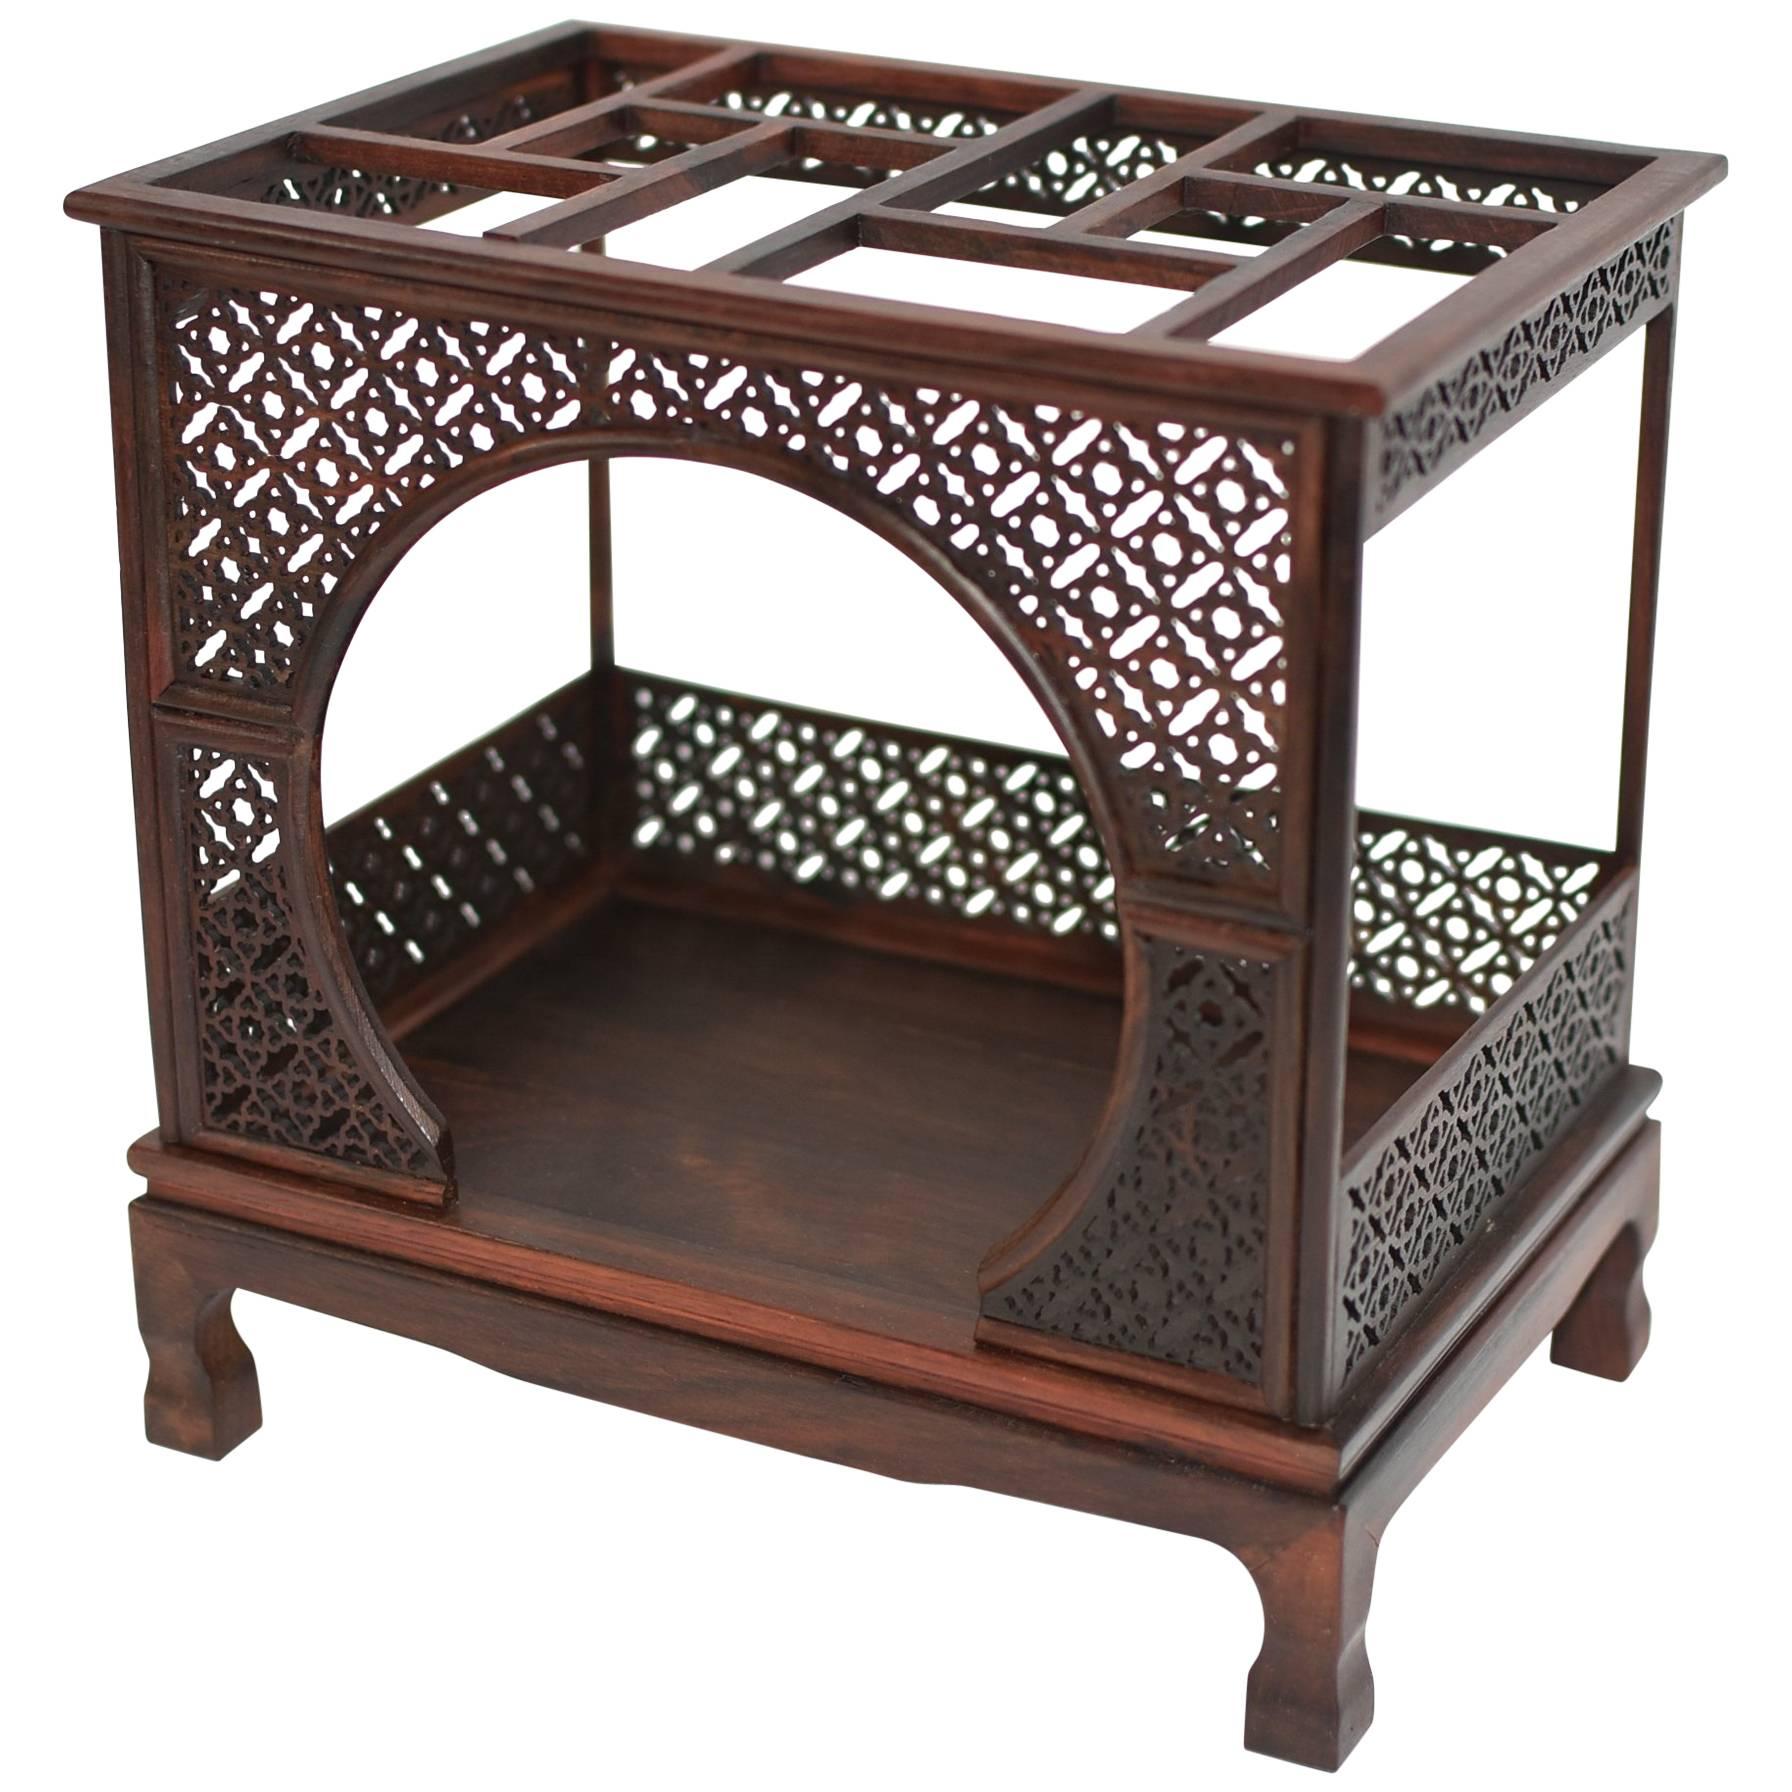 Mini Chinese Moon Bed, Rosewood Model of Bed